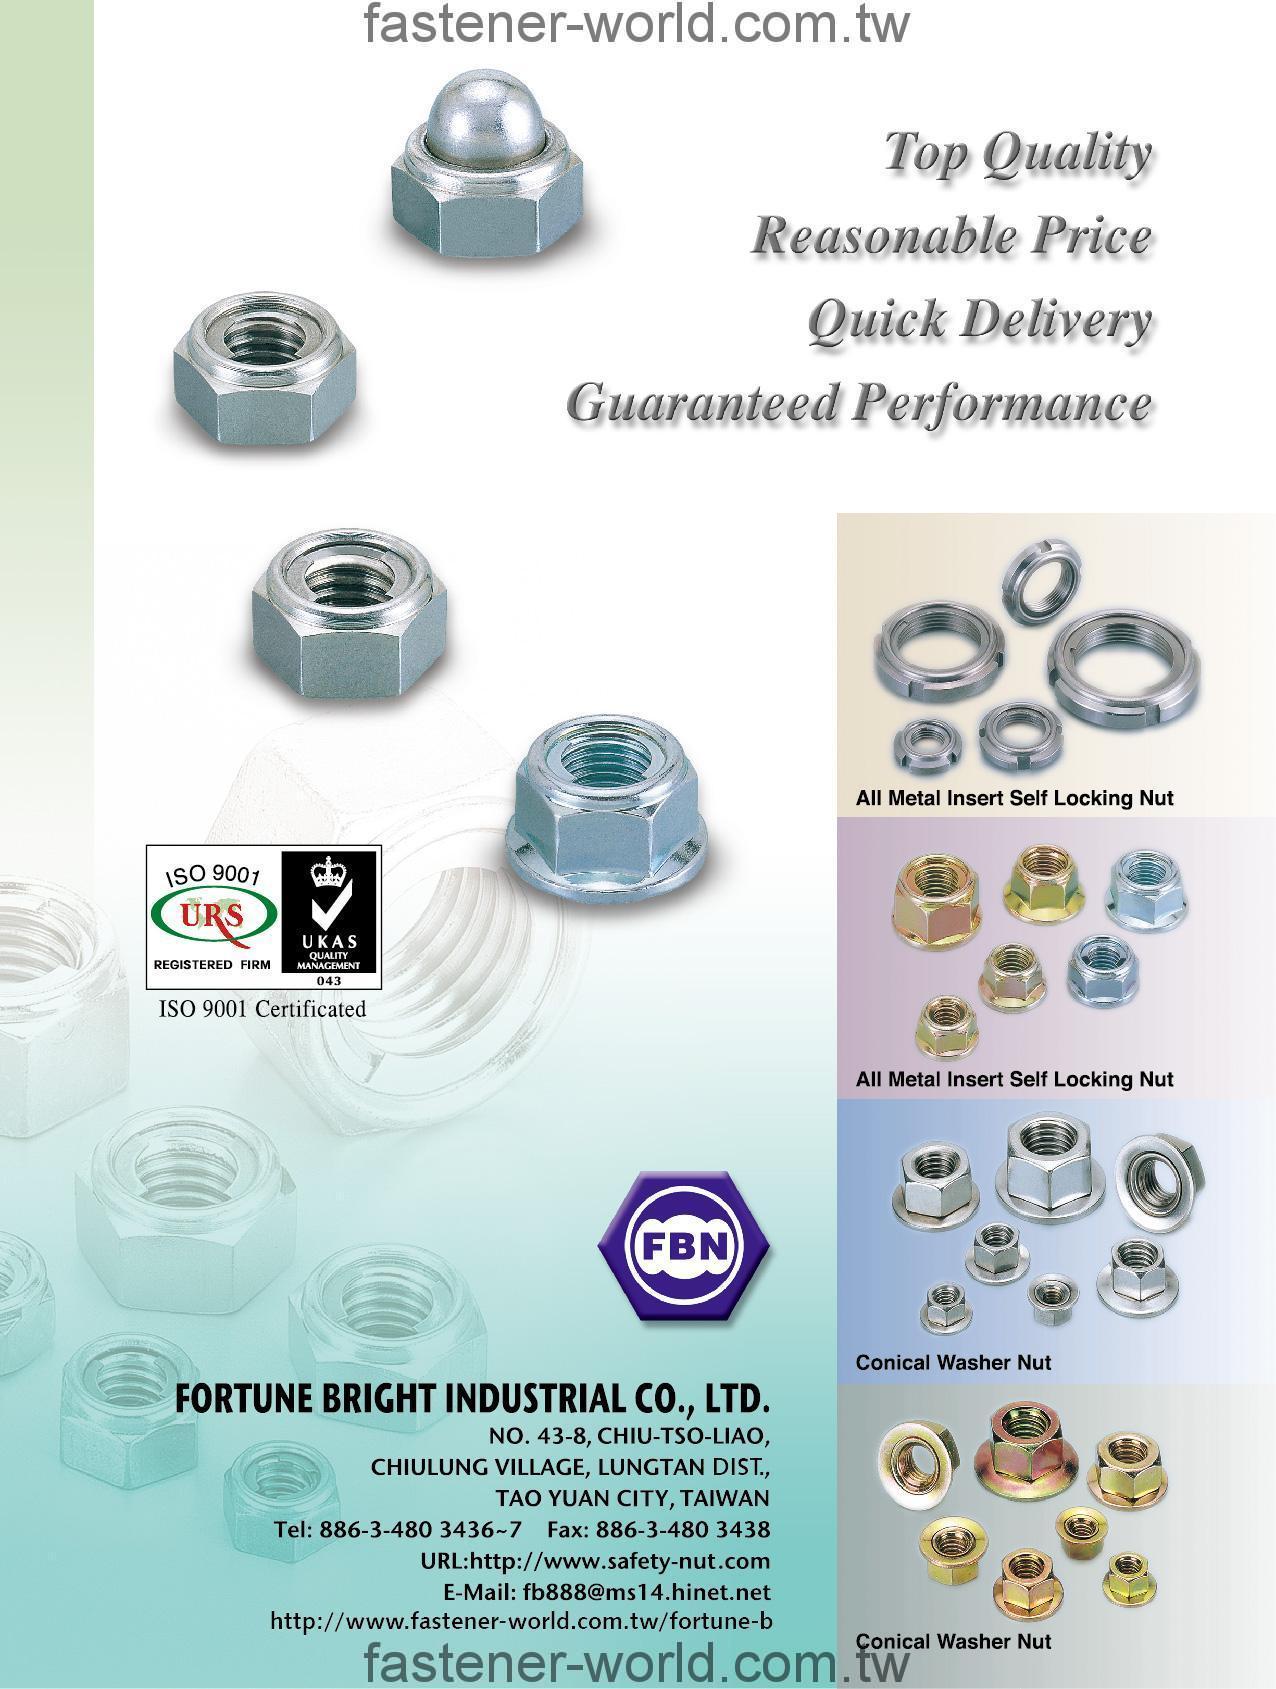 FORTUNE BRIGHT INDUSTRIAL CO., LTD. _Online Catalogues